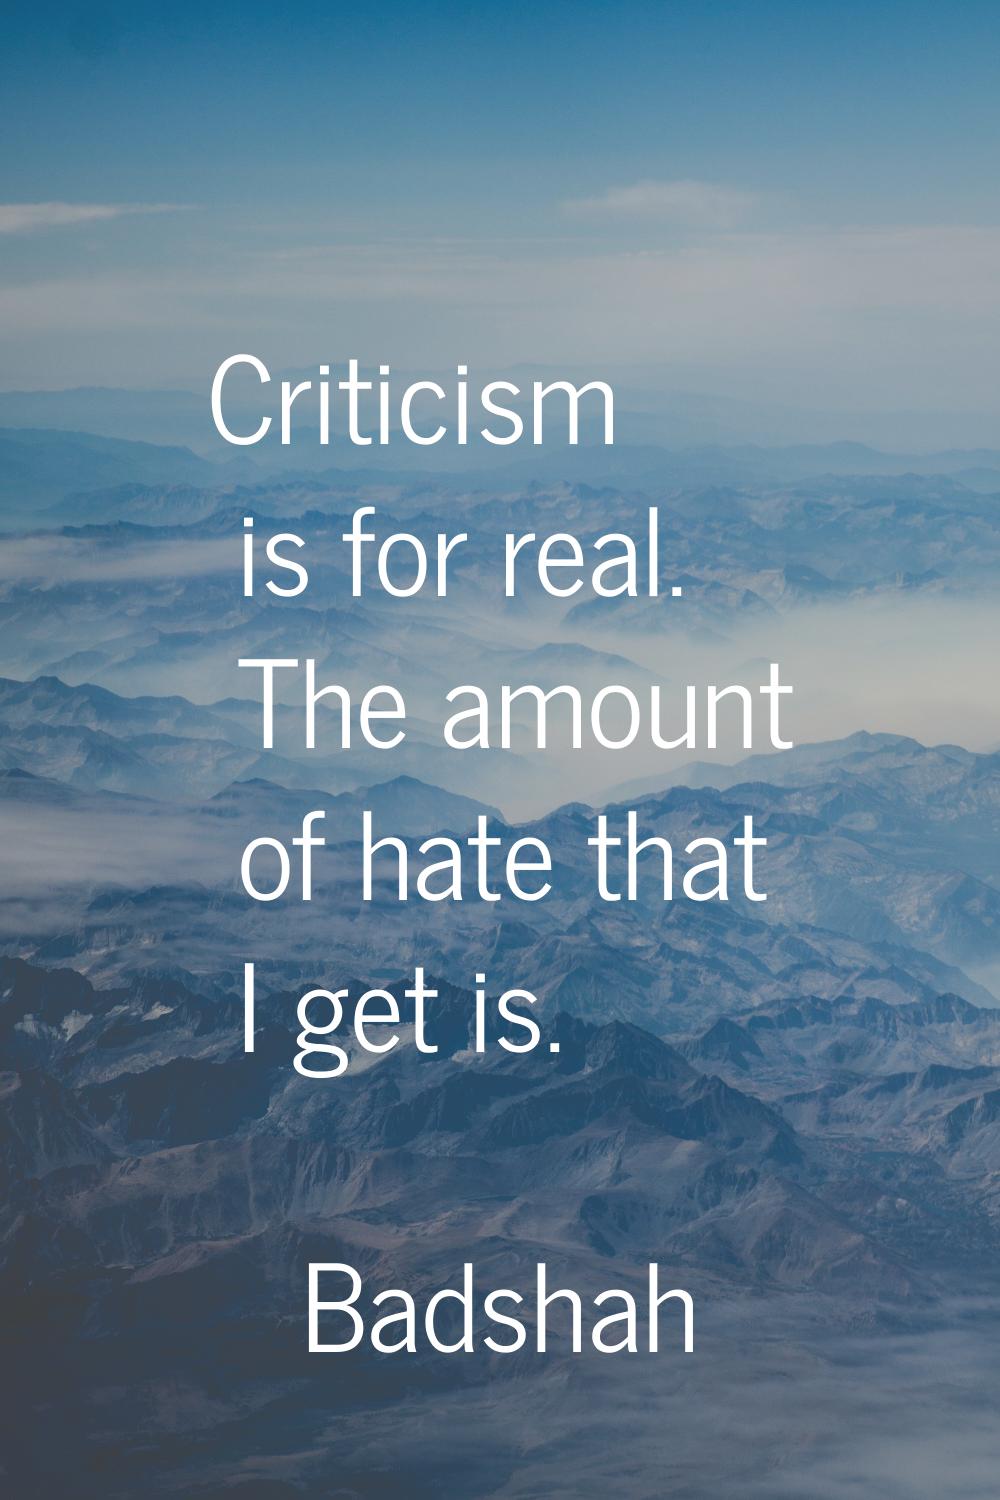 Criticism is for real. The amount of hate that I get is.